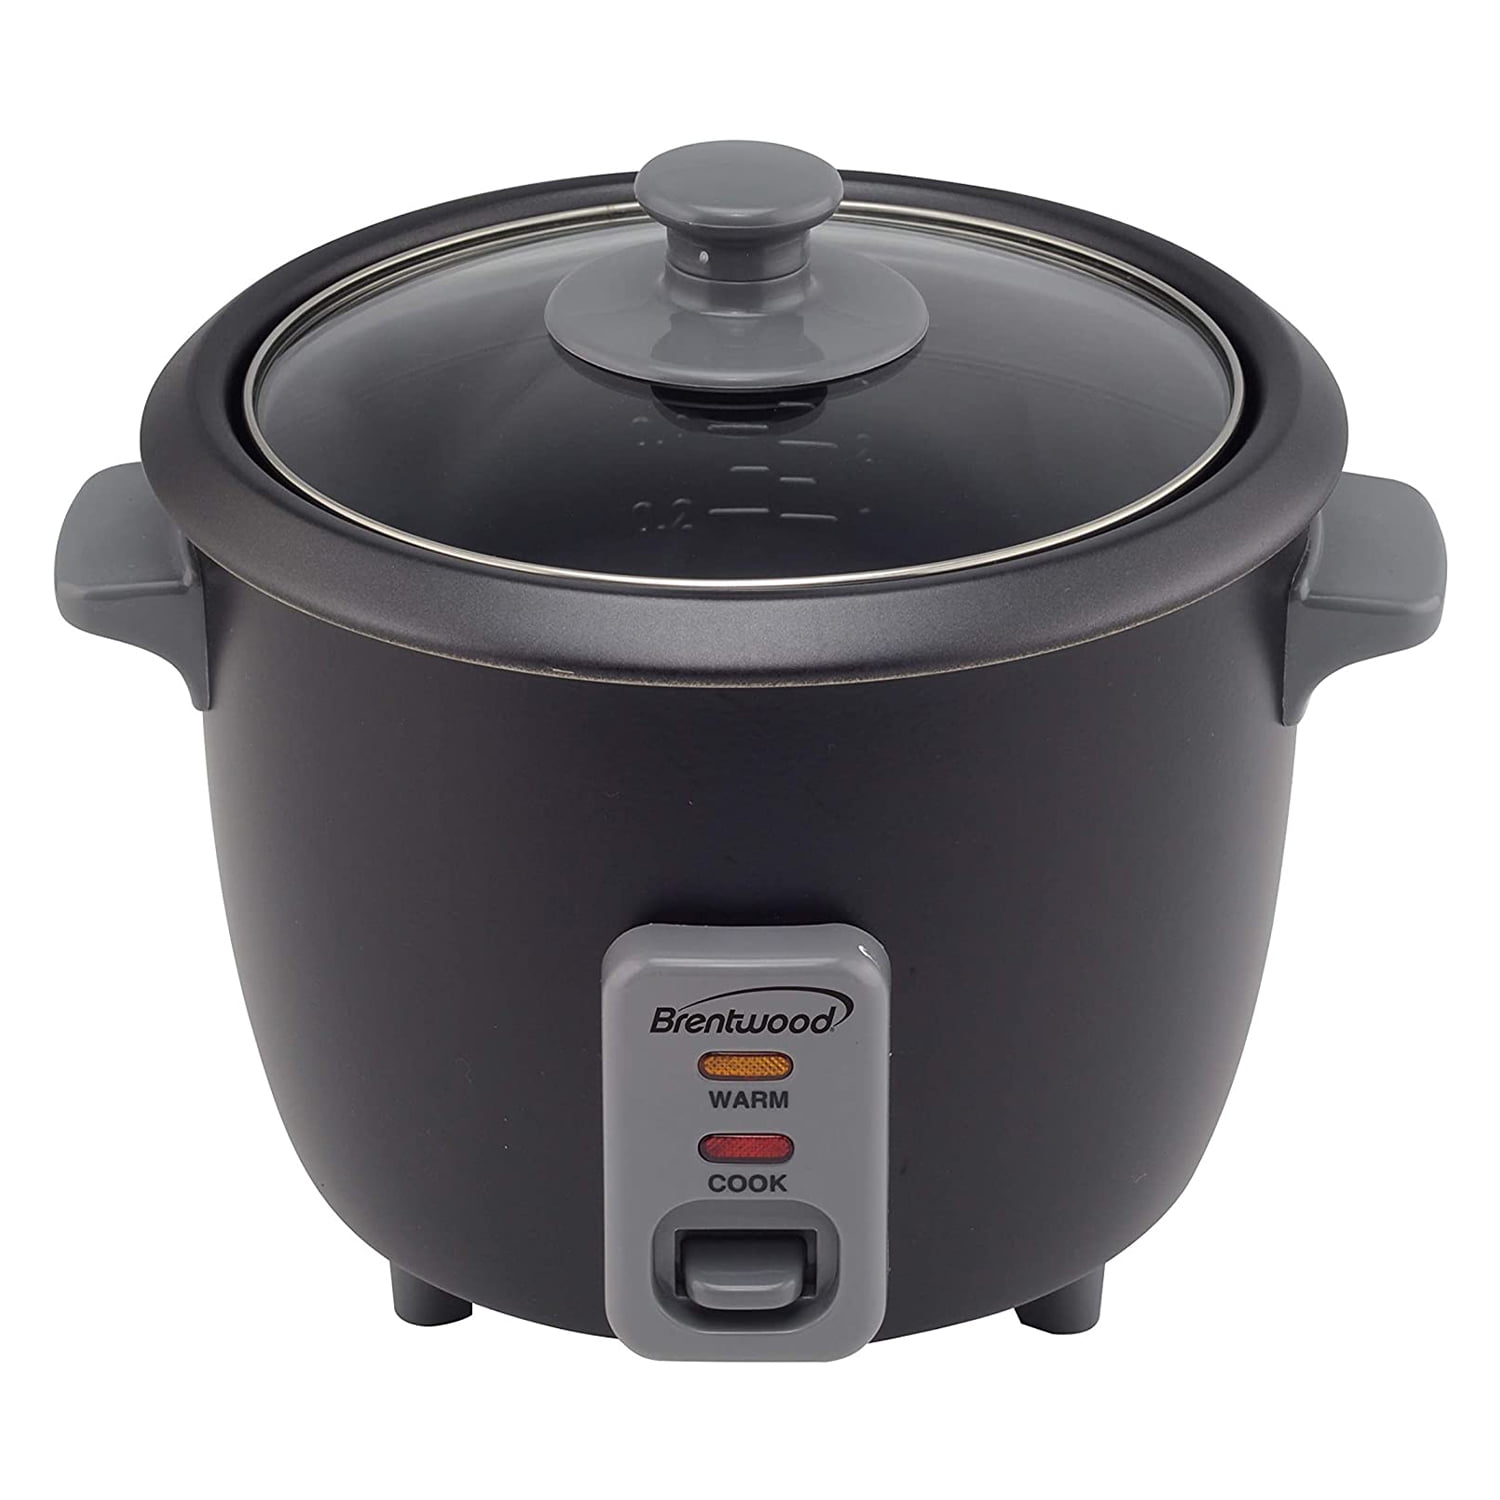 Brentwood Uncooked/8-Cup and Food Rice TS-700BK 4-Cup Cooker Black Cooked Steamer,